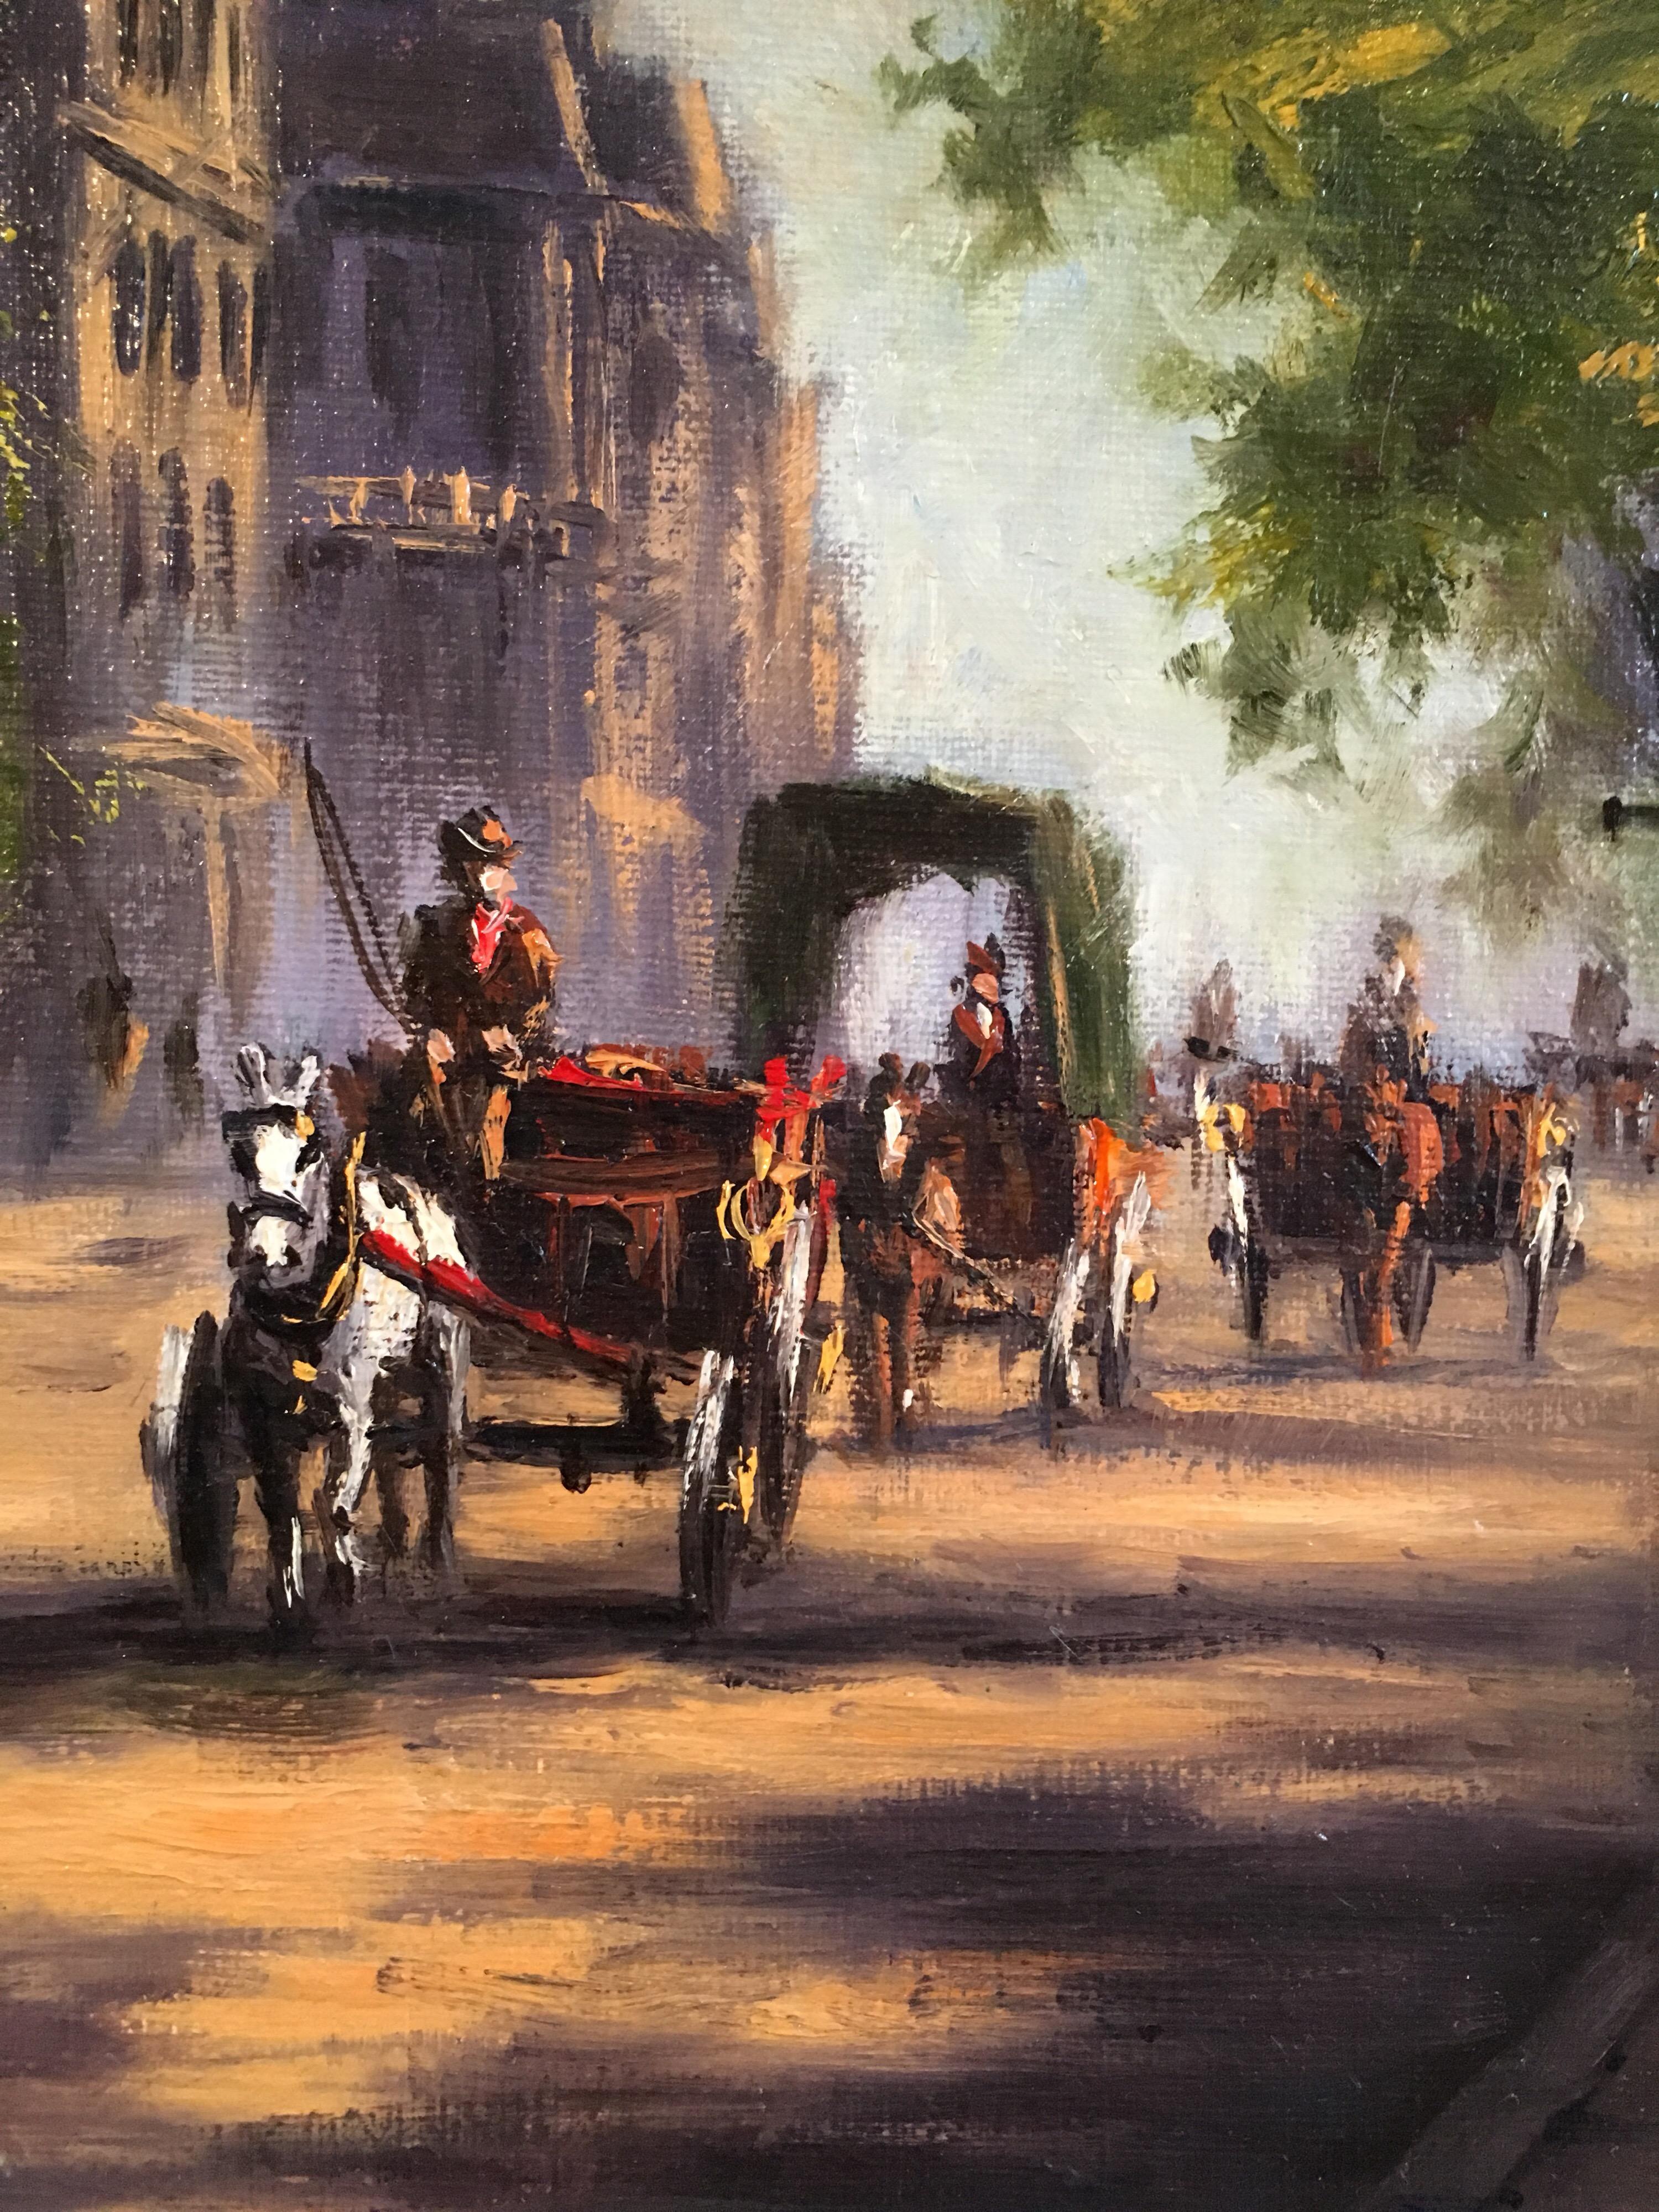 Horse and Carriage, Impressionist City Scene, Signed Oil Painting
By British artist, Anthony Hedges, 20th Century
Signed by the artist on the lower left hand corner
Oil painting on canvas, unframed
Canvas size: 16 x 12 inches

Beautiful scene of a